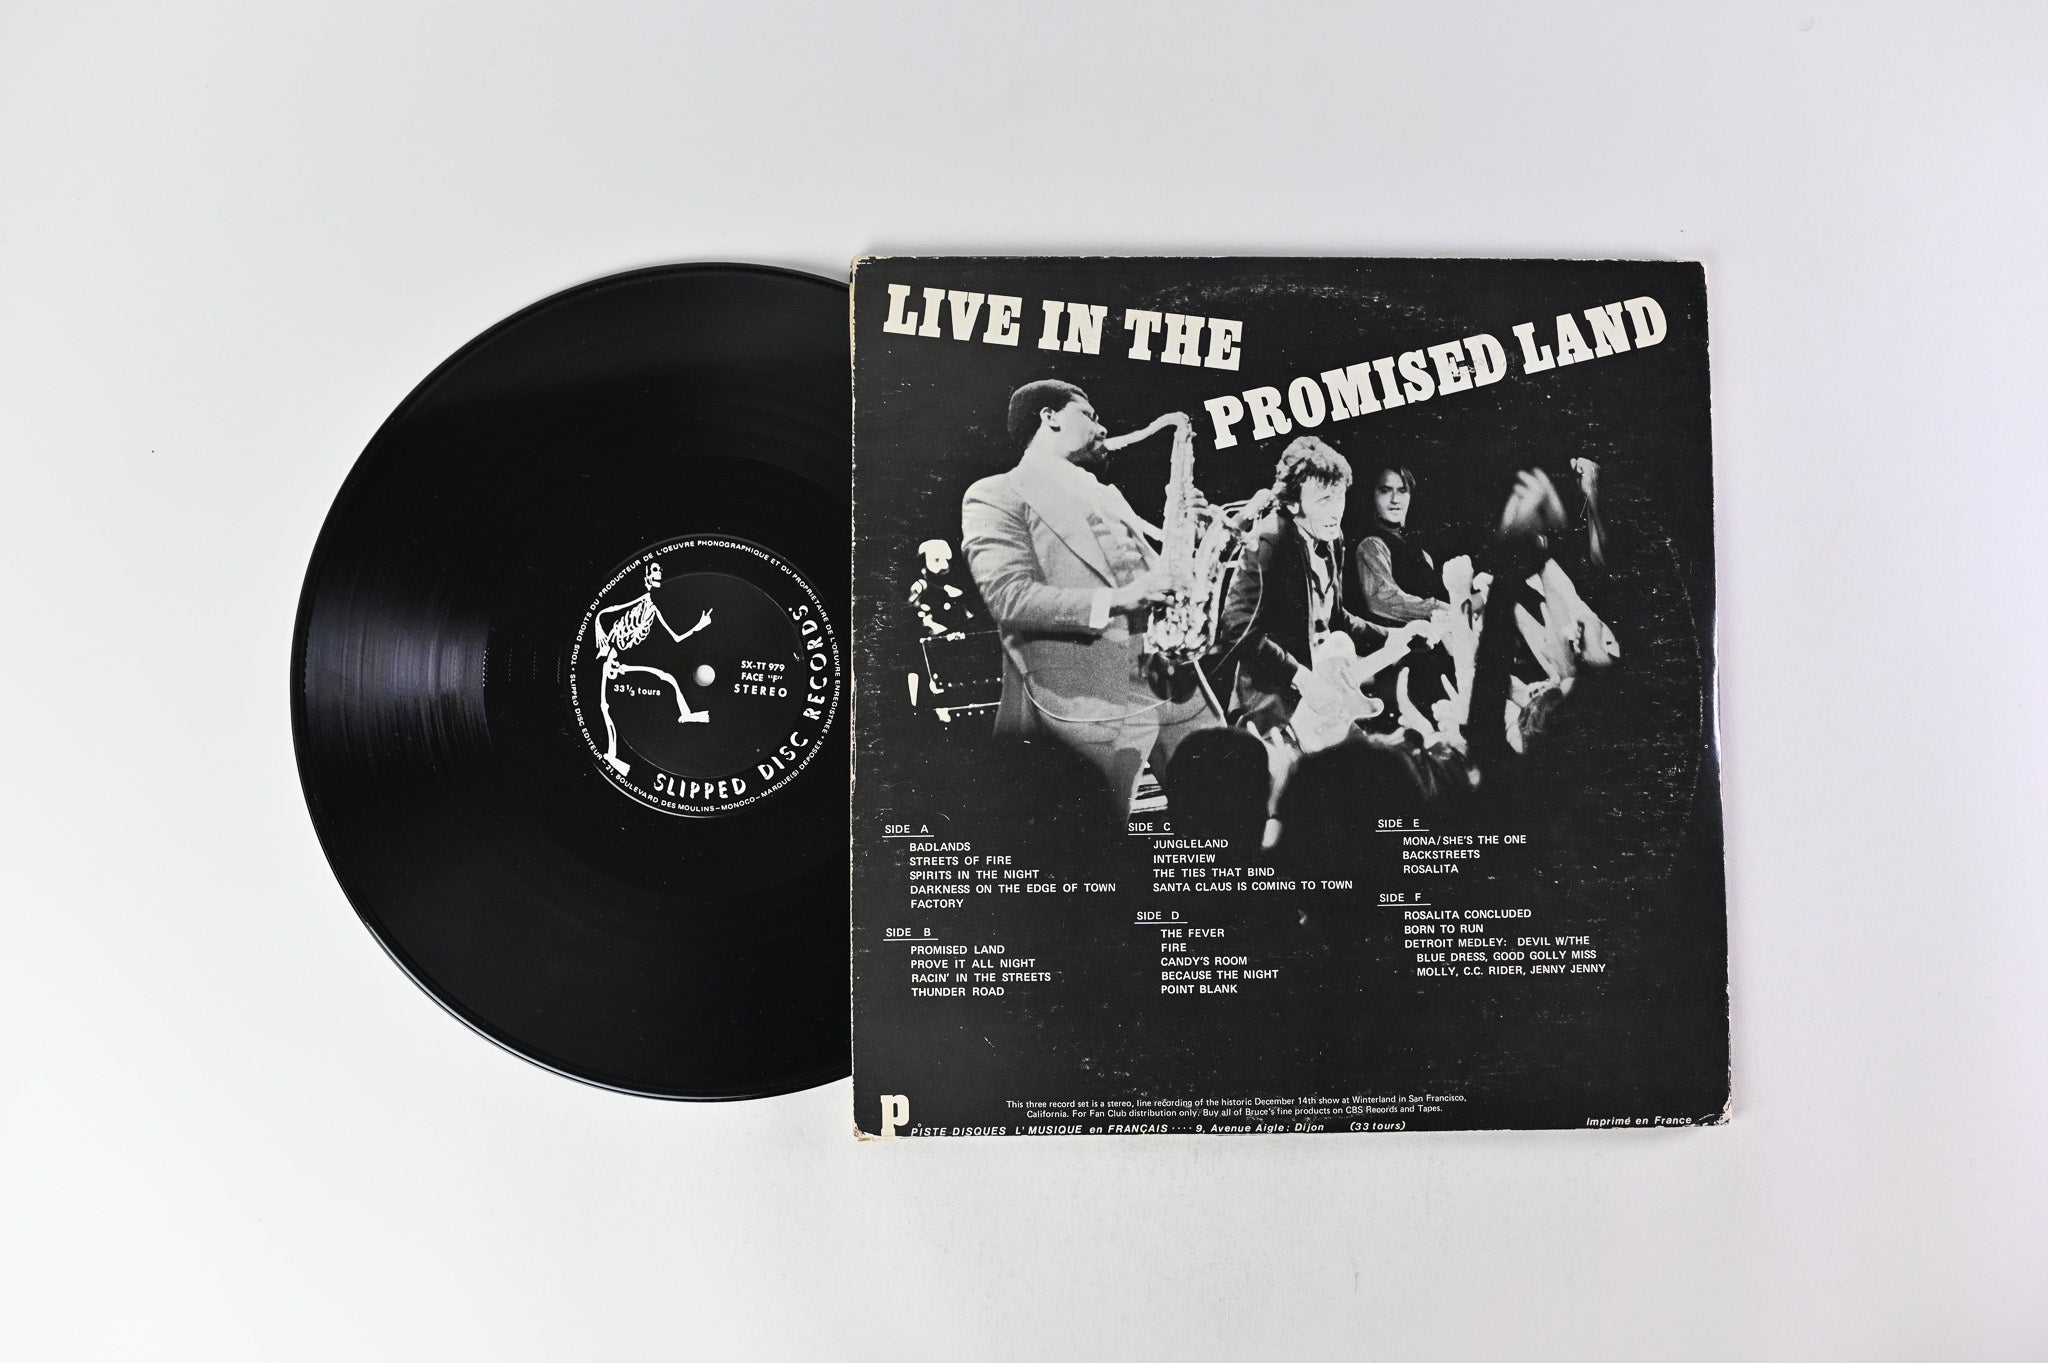 Bruce Springsteen & The E-Street Band - Winterland, 1978 (Live In The Promised Land) on Piste Disques - Unofficial pressing